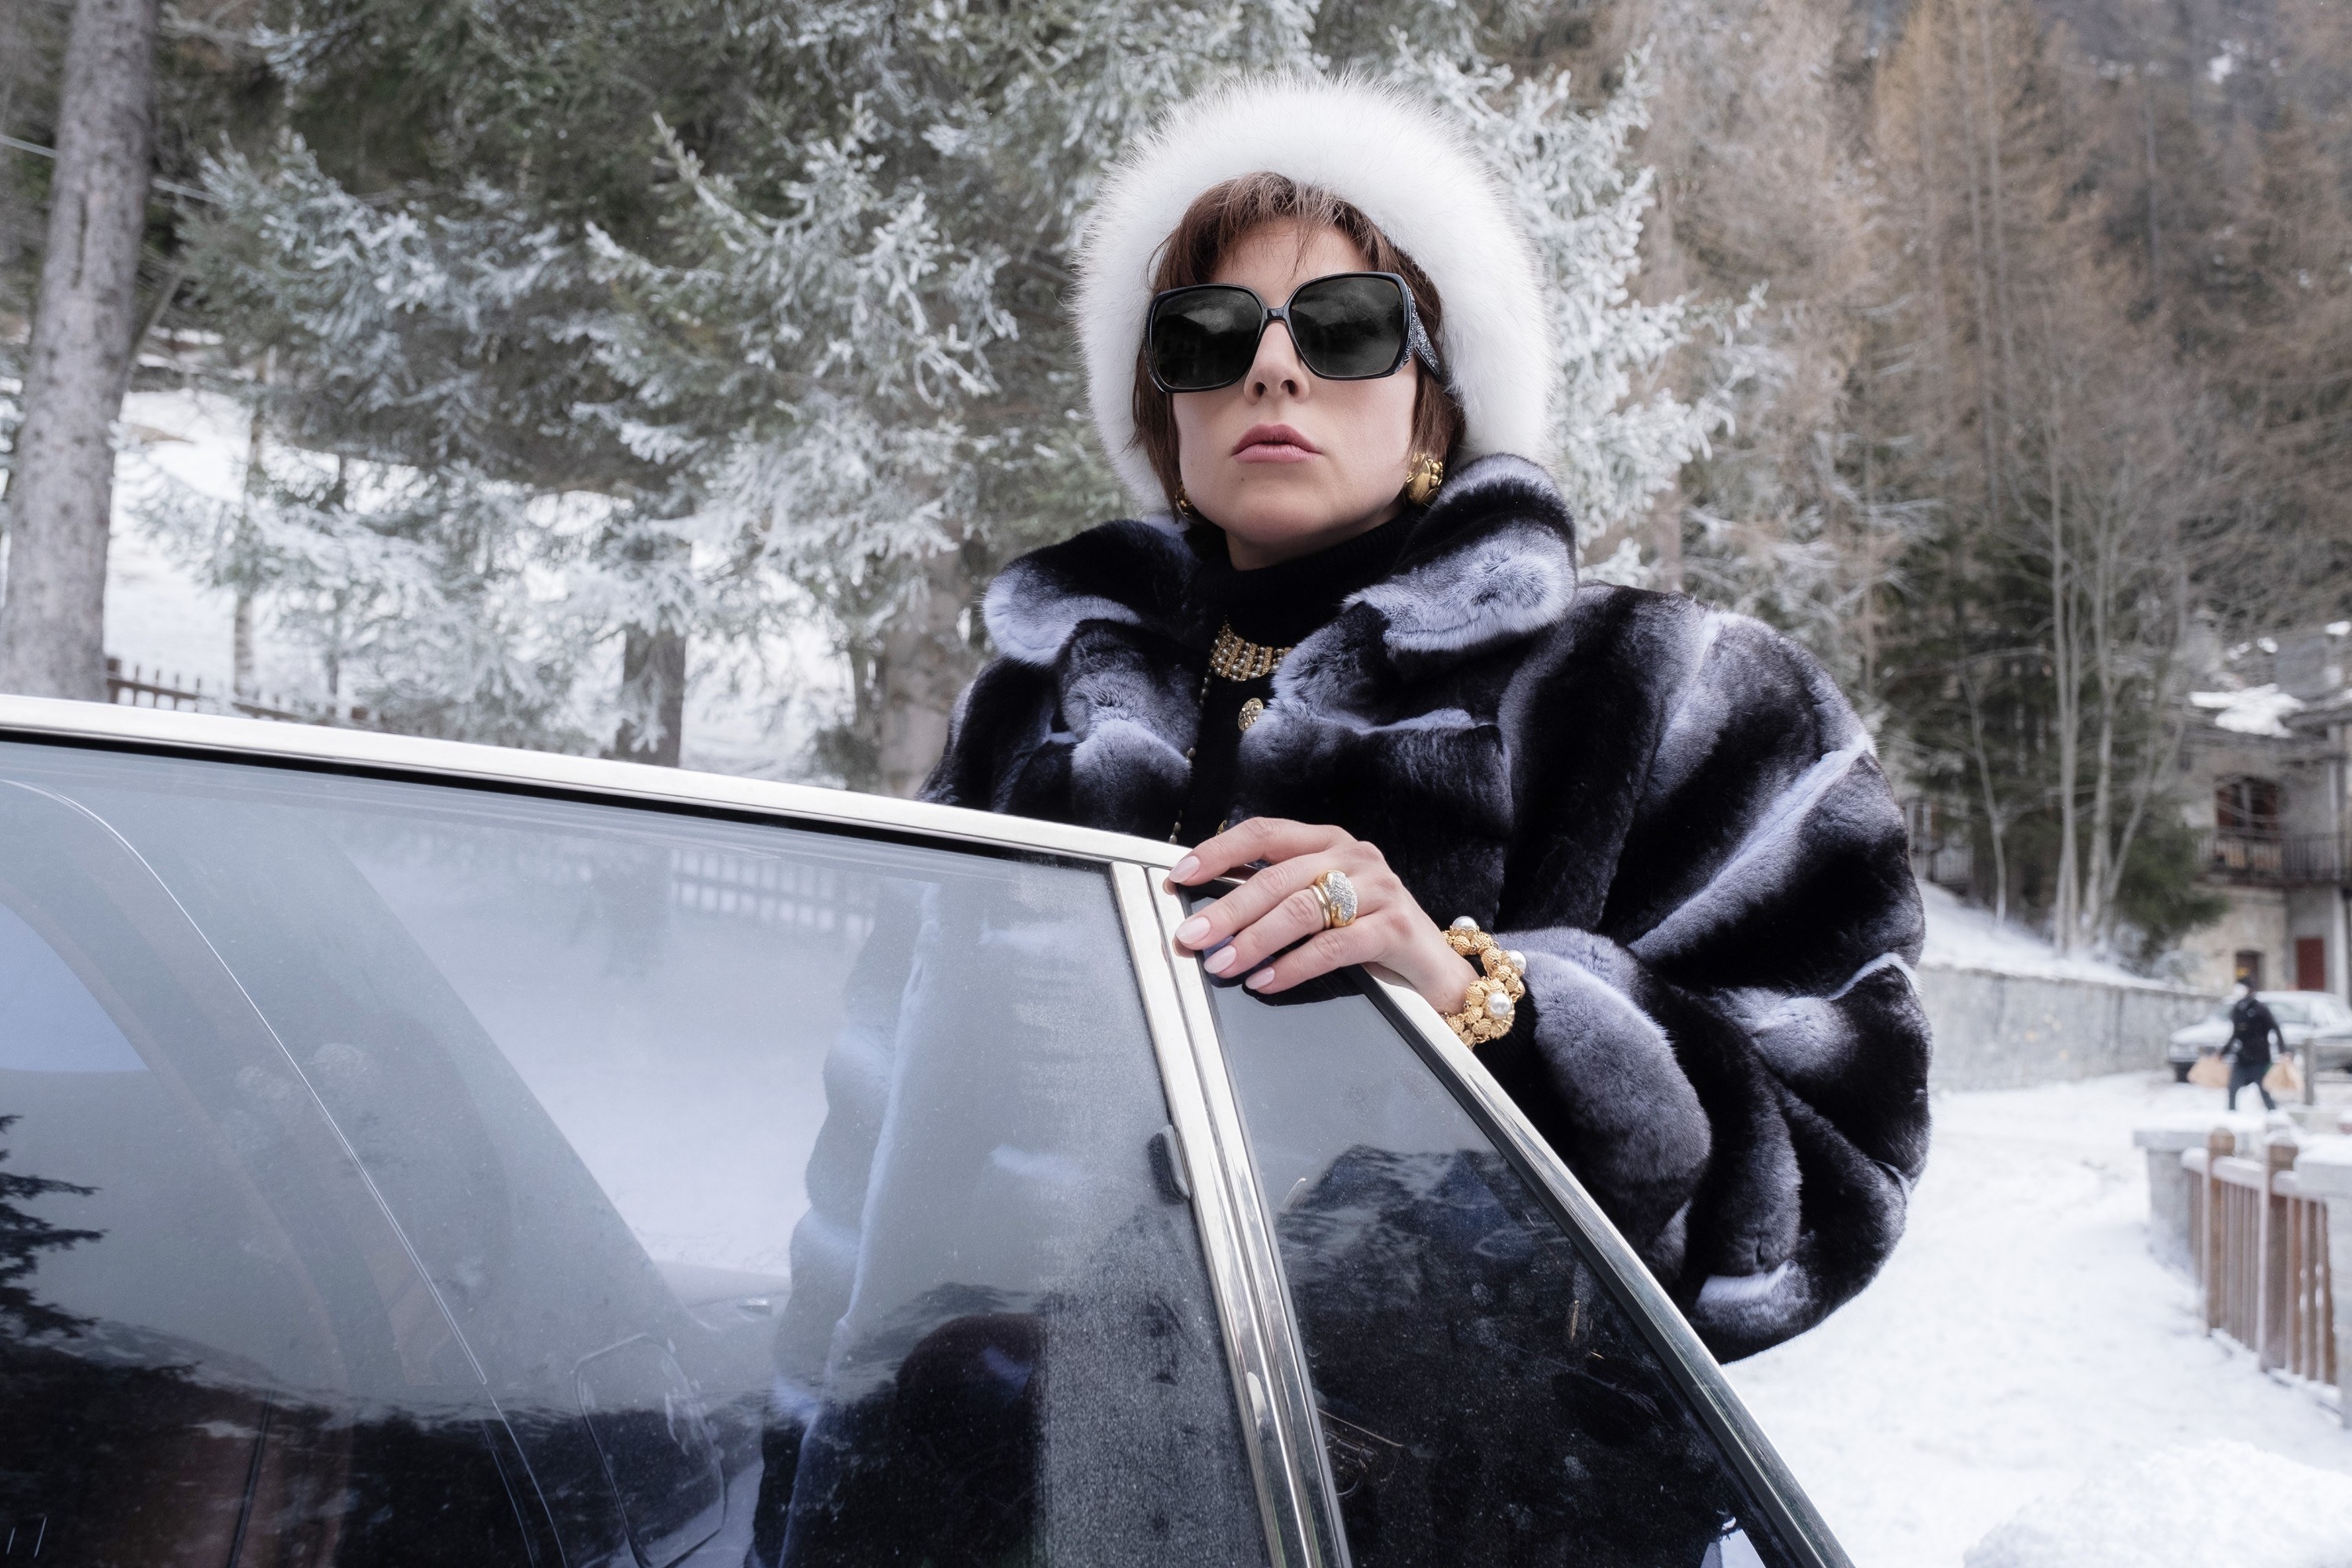 Gaga as Patrizia in a fur coat standing next to a car in a snowy setting